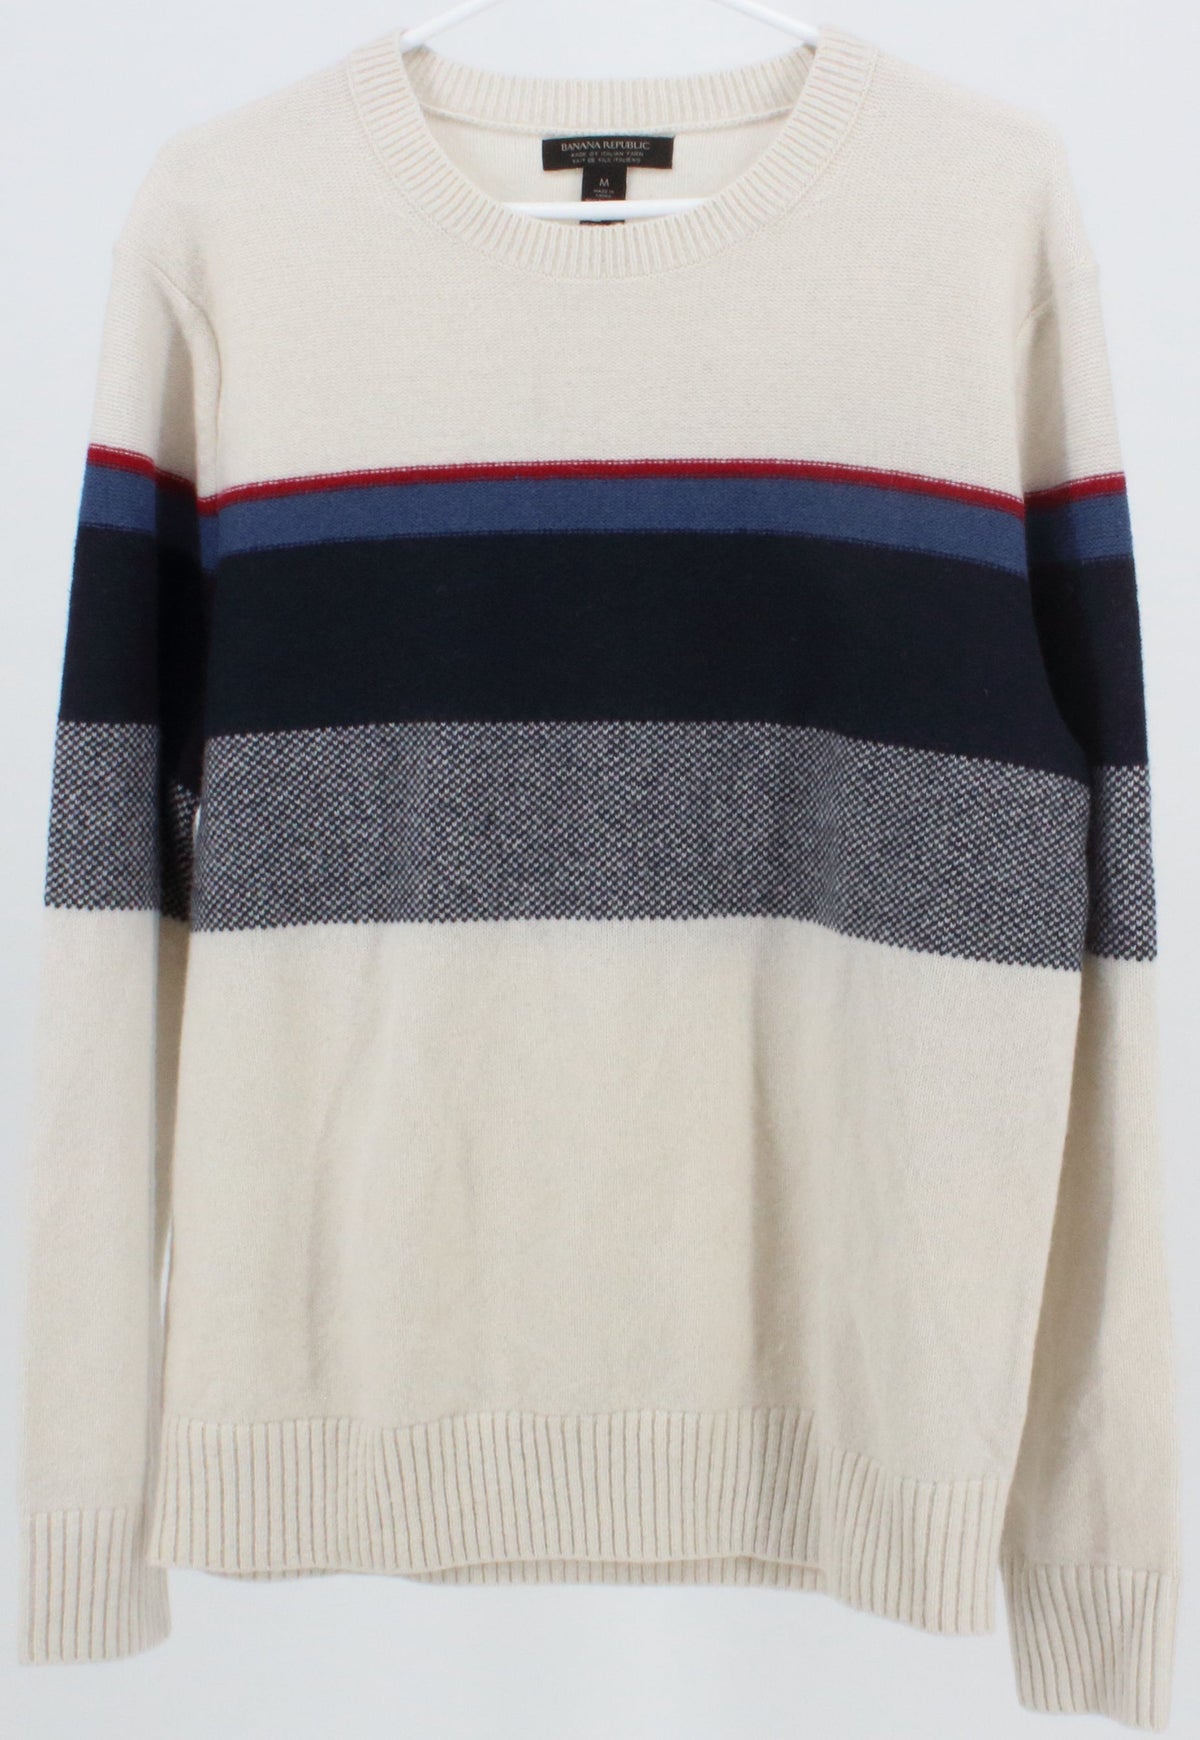 Banana Republic Off White and Blue Sweater